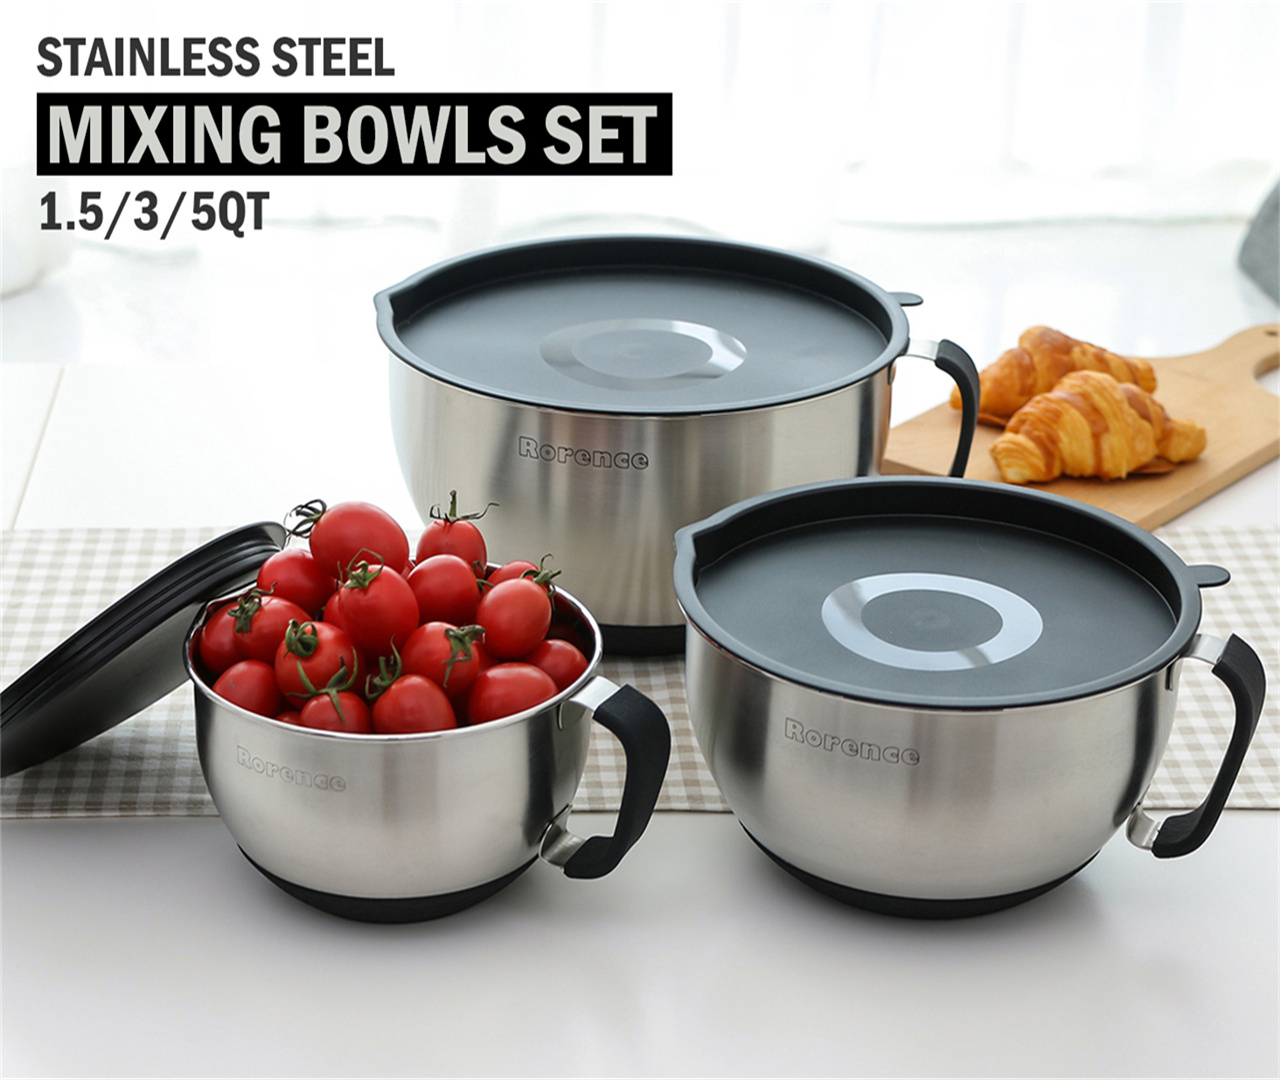 MIXING BOWLS-details-01r3z